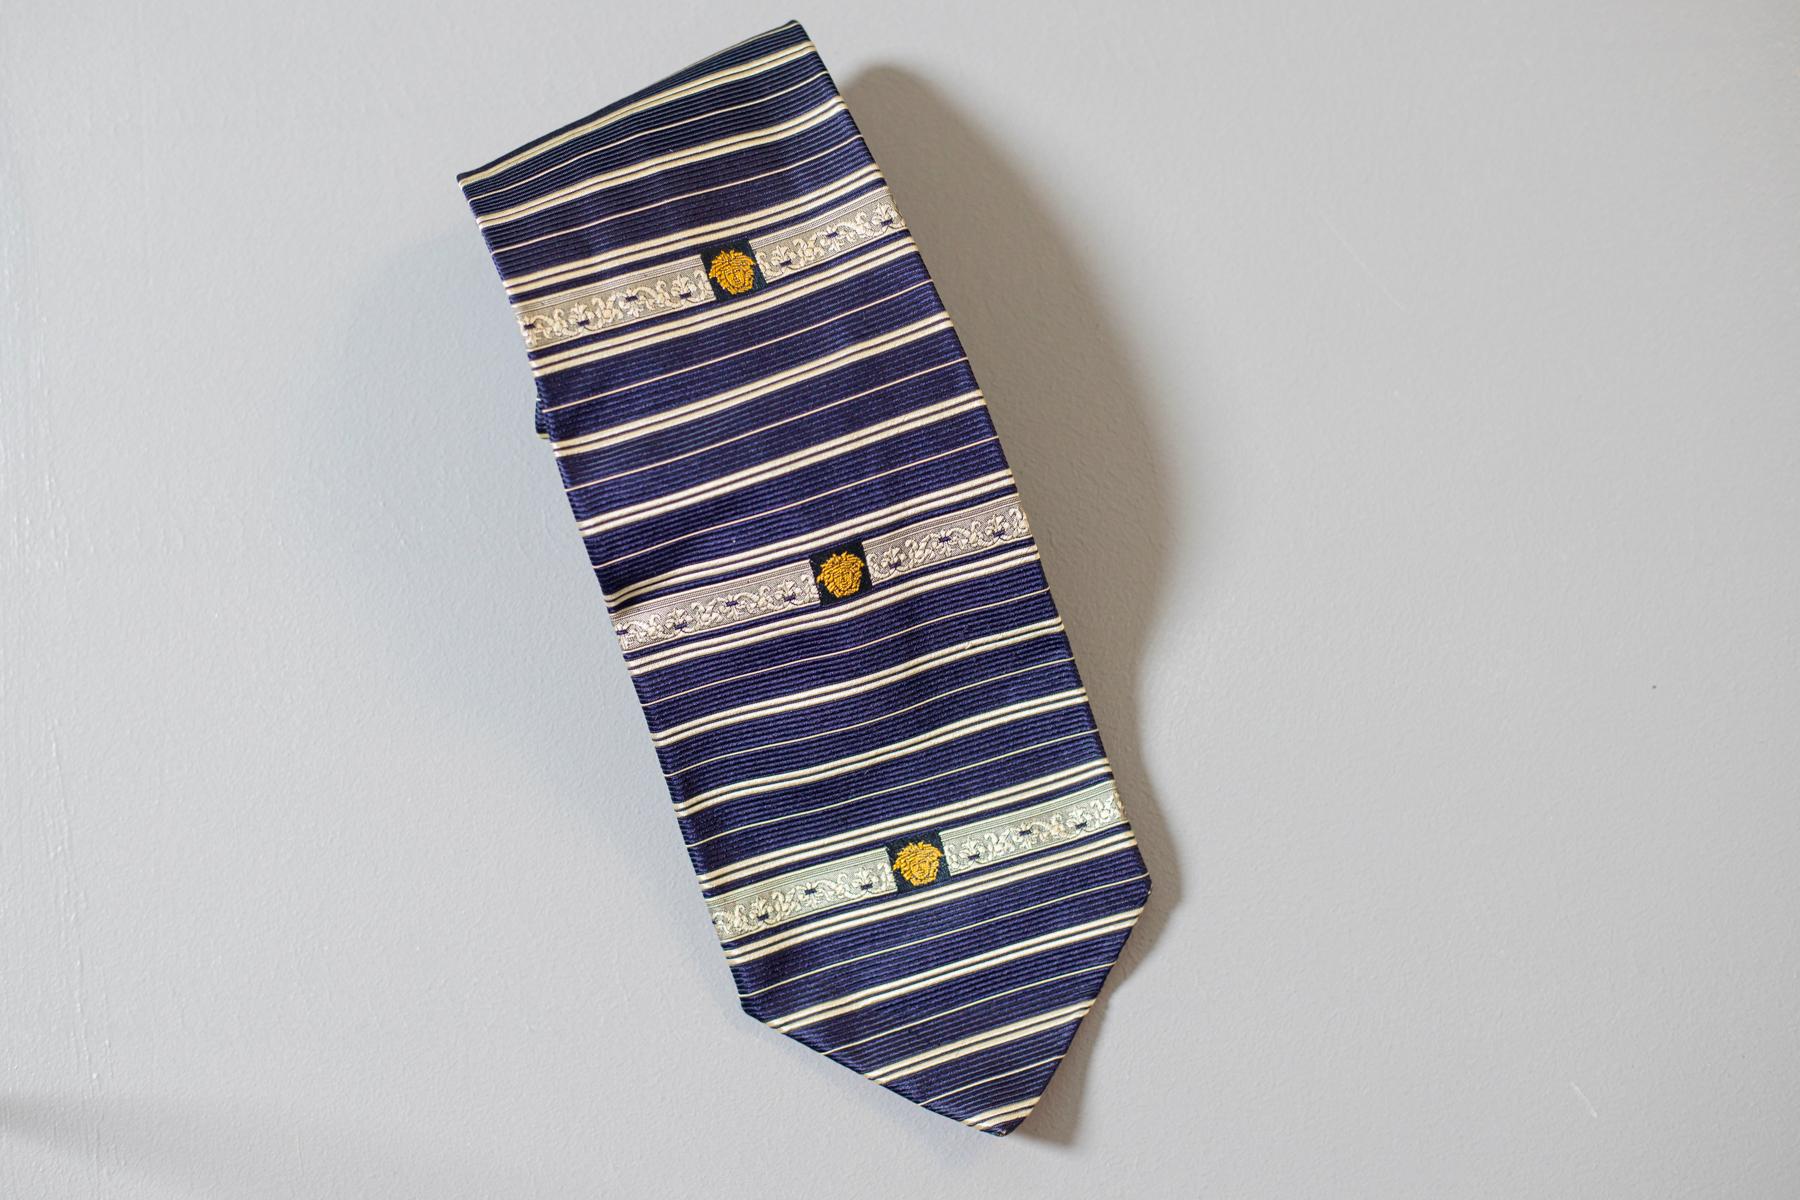 This vintage tie designed by Gianni Versace is an evergreen. This classy all-silk tie is decorated not only with blue and white stripes, but also with Versace’s main symbol: Medusa’s golden head. This piece of fashion is classy and elegant: it is